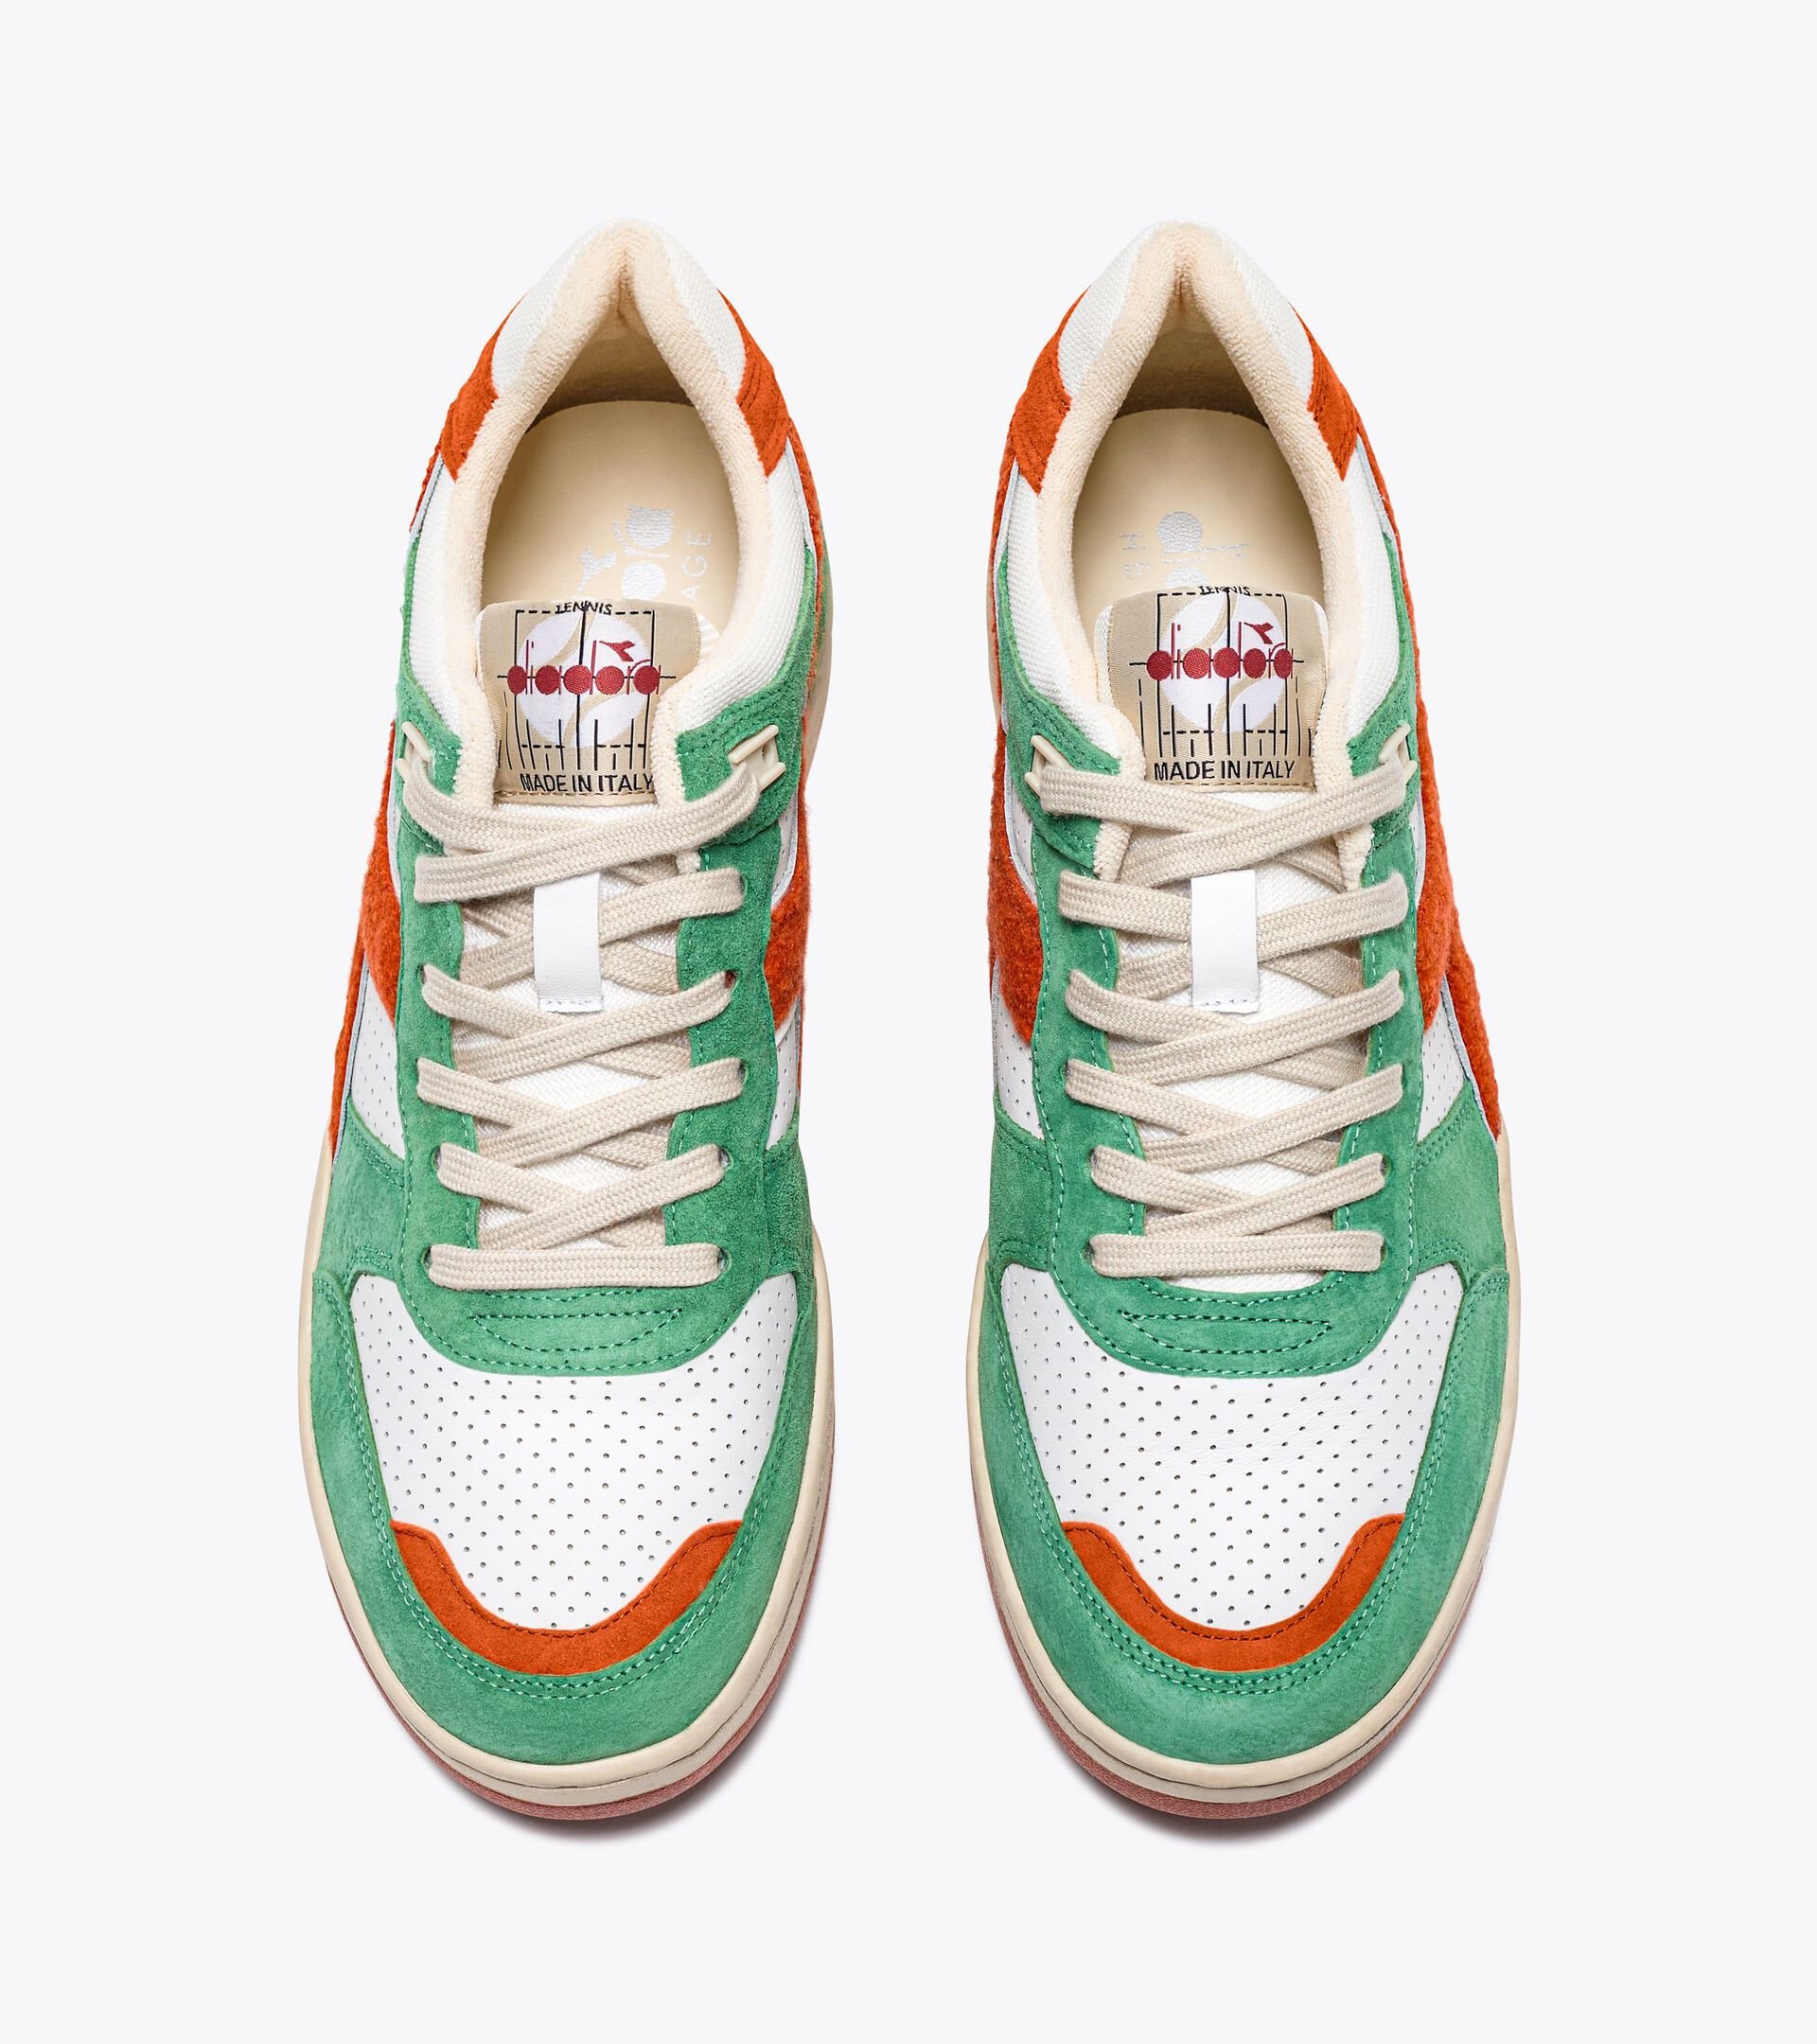 B.560 USED RR ITALIA Heritage sneakers - Made in Italy - Gender Neutral -  Diadora Online Store US